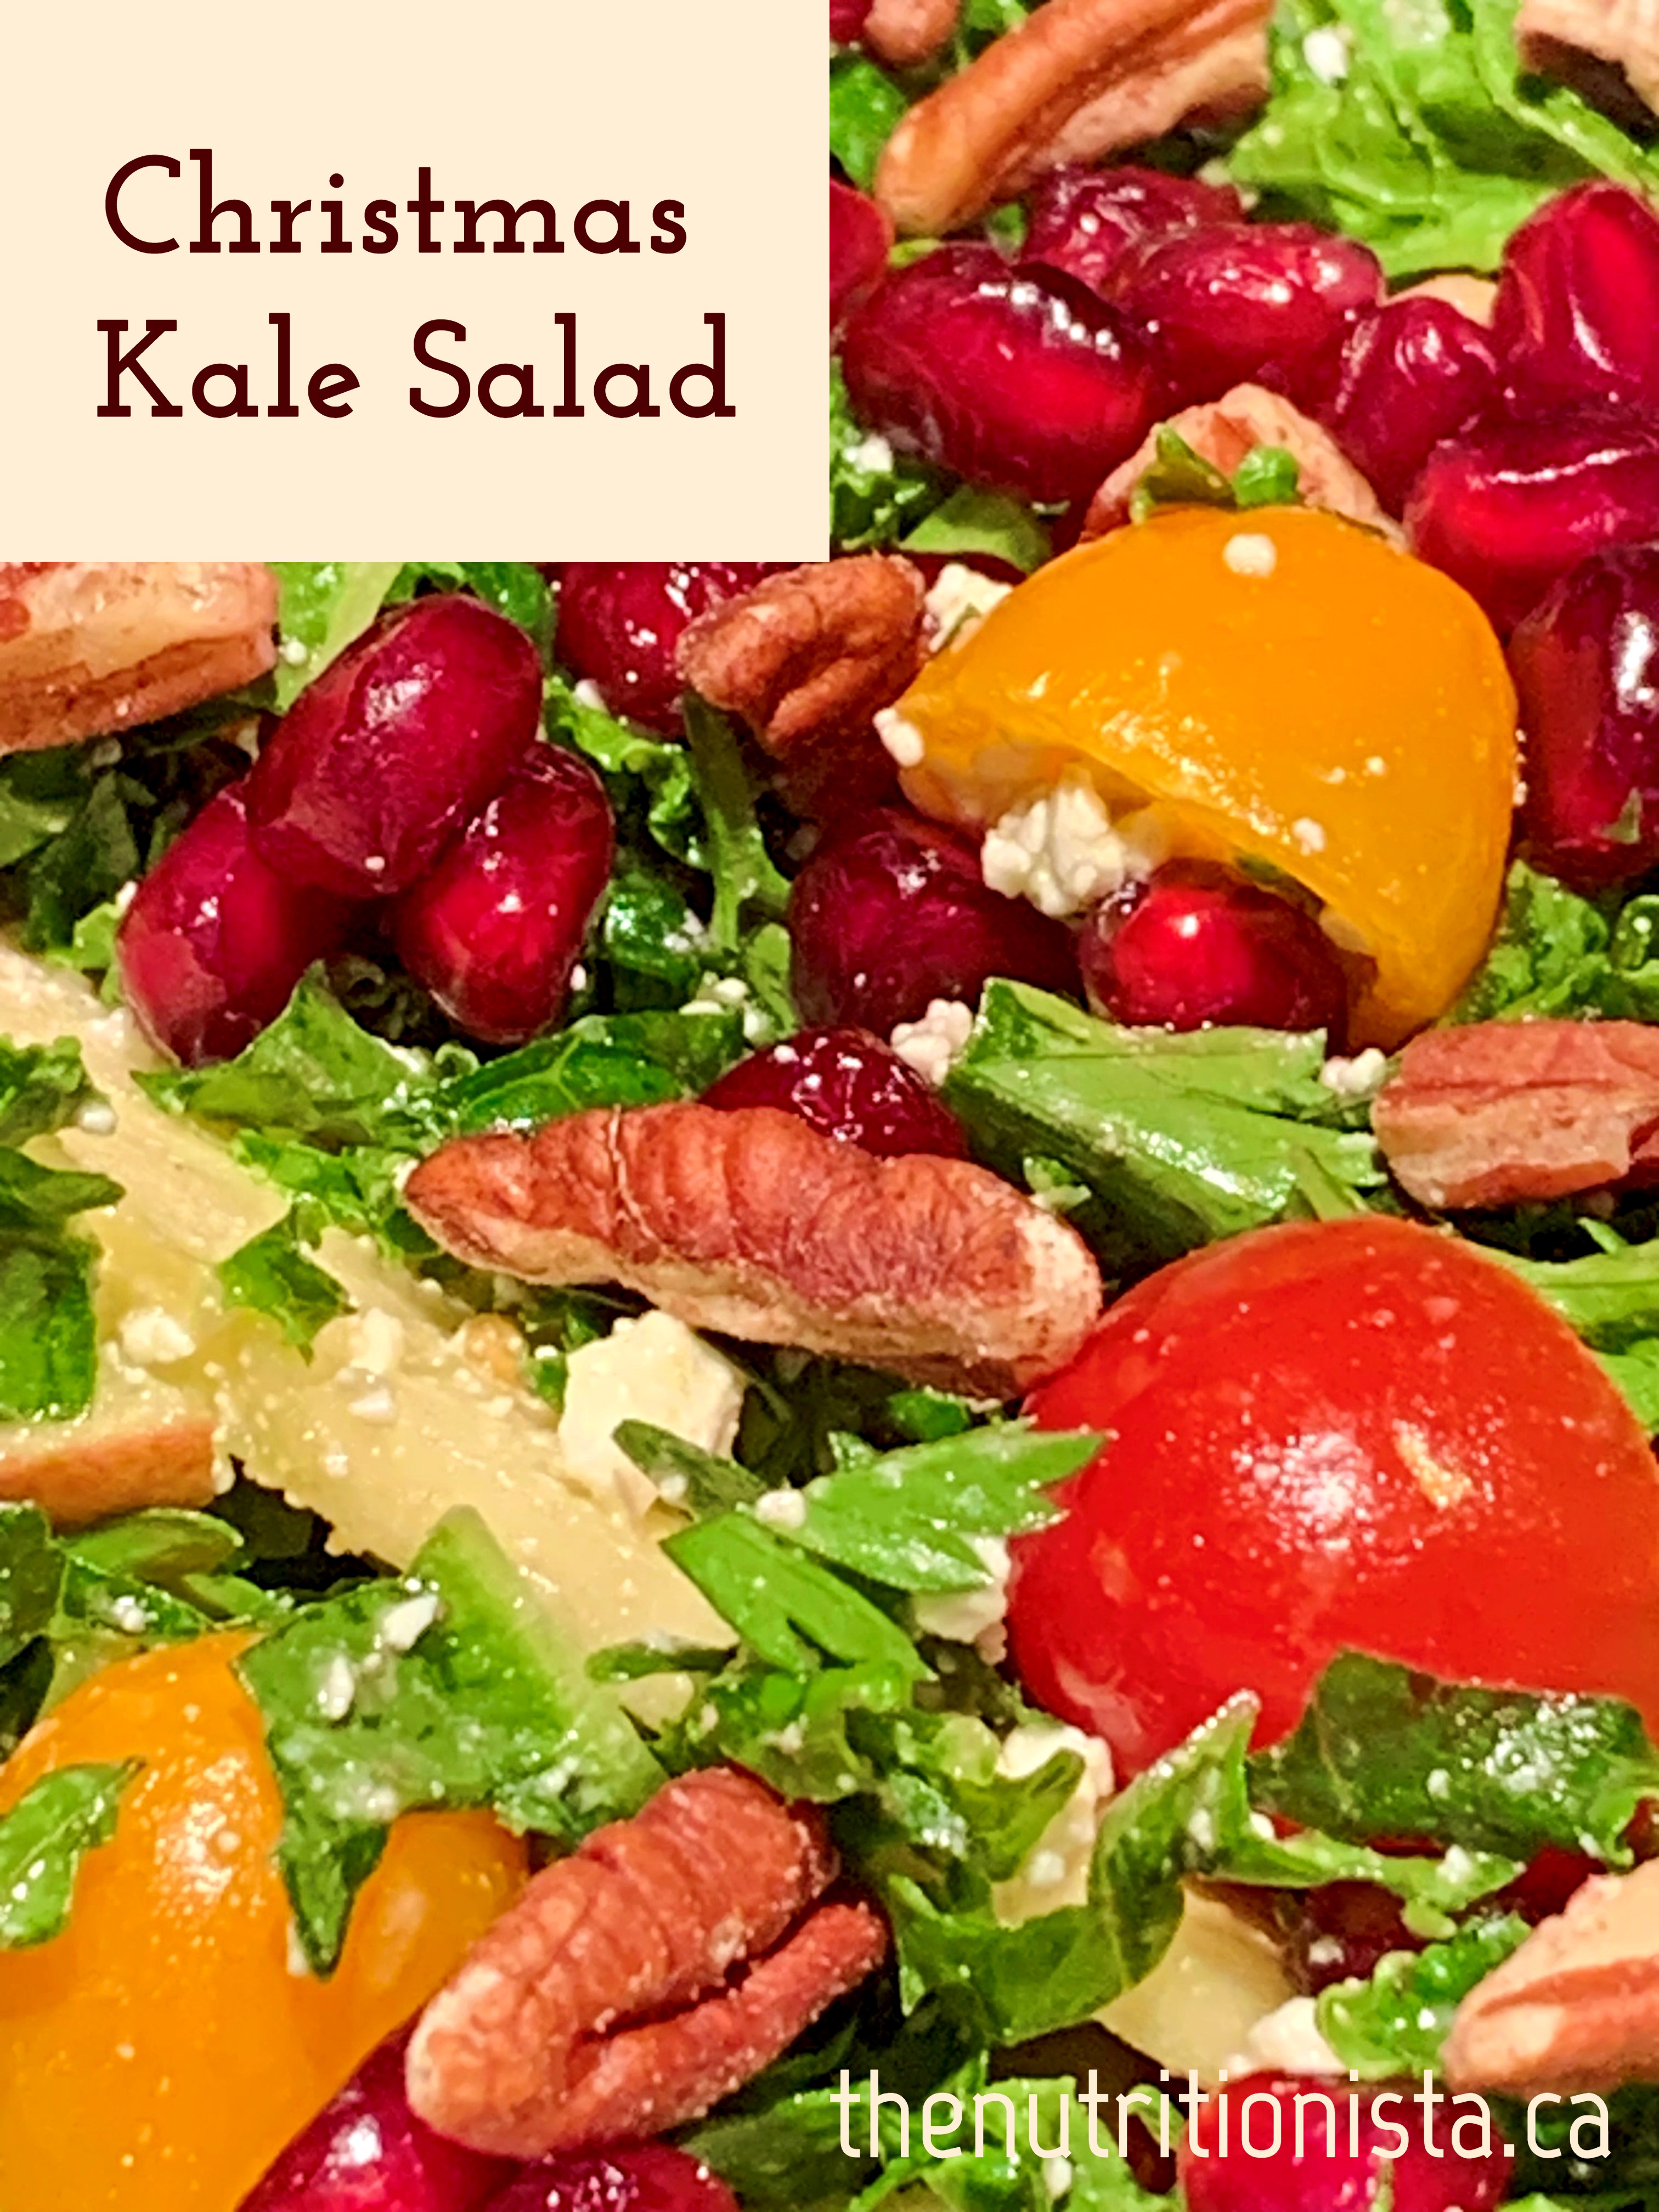 The most delicious healthy Christmas kale salad with pomegranate seeds, pecans, and more for your holiday dinner!